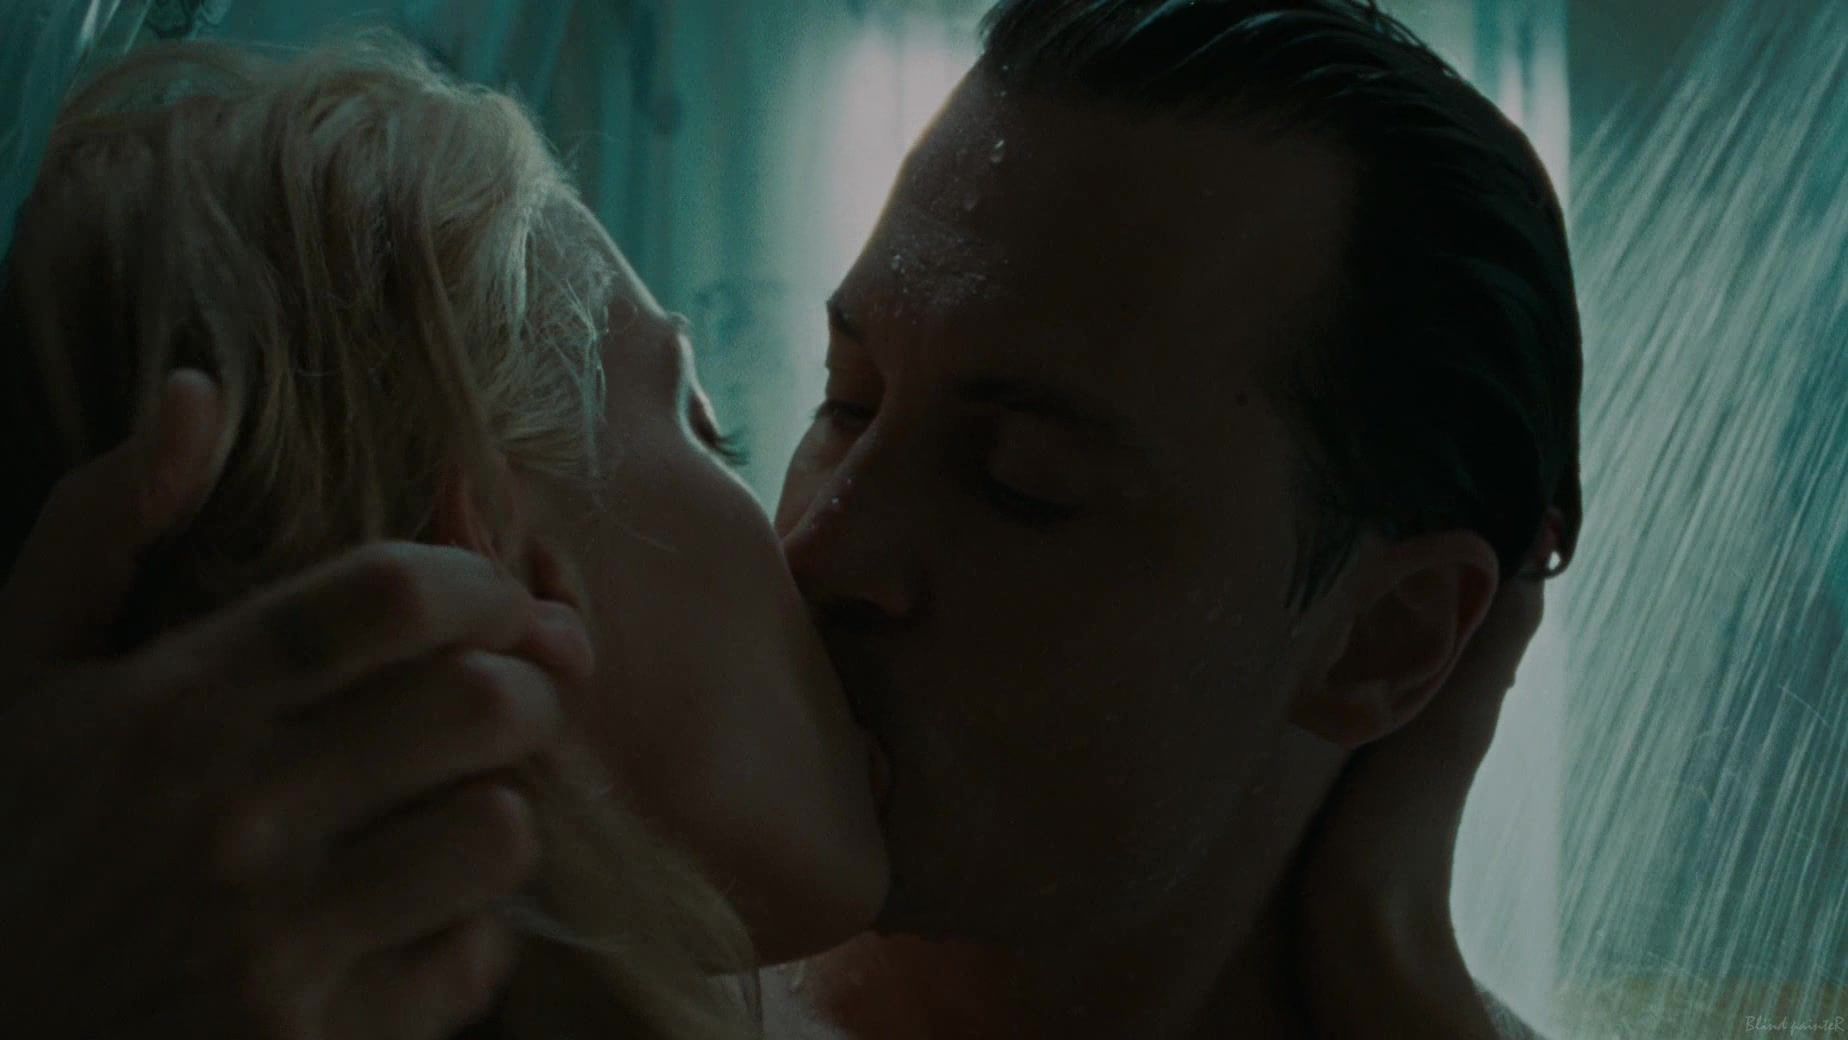 Pawg Amber Heard nude - The Rum Diary (2011) High Definition